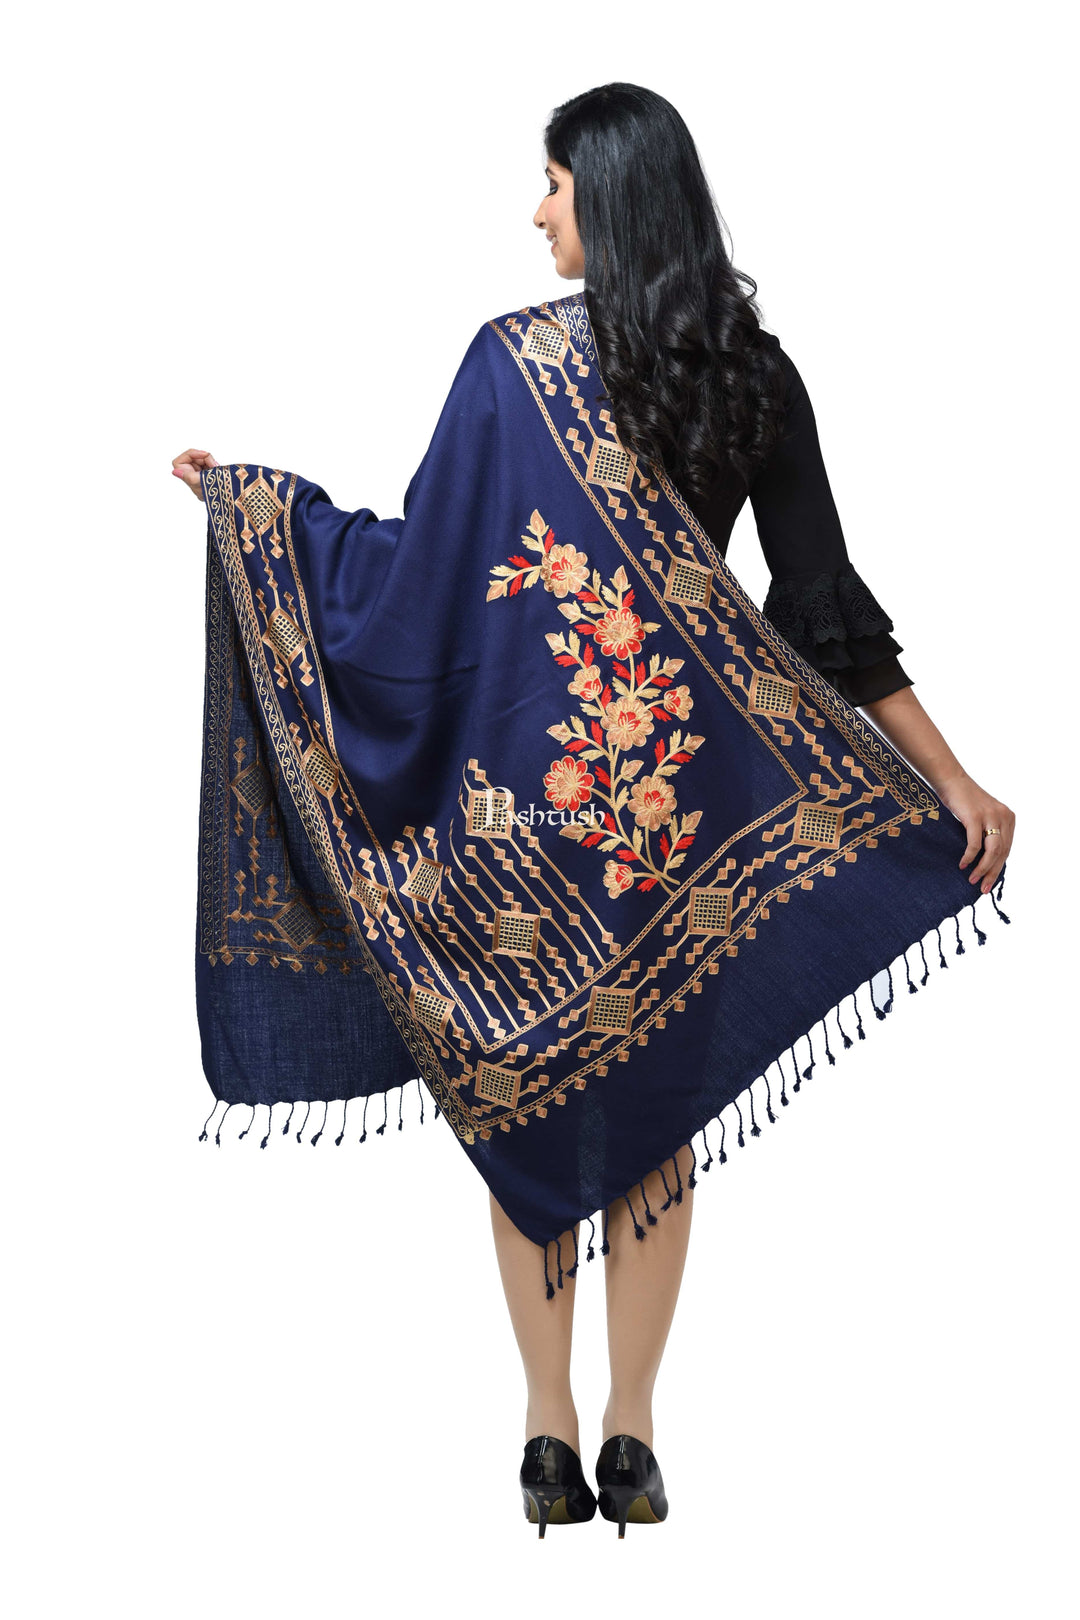 Pashwool Womens Stoles and Scarves Scarf Pashwool Womens Kashmiri Embroidery Stole, Soft And Warm, Woollen Stole, Navy Blue